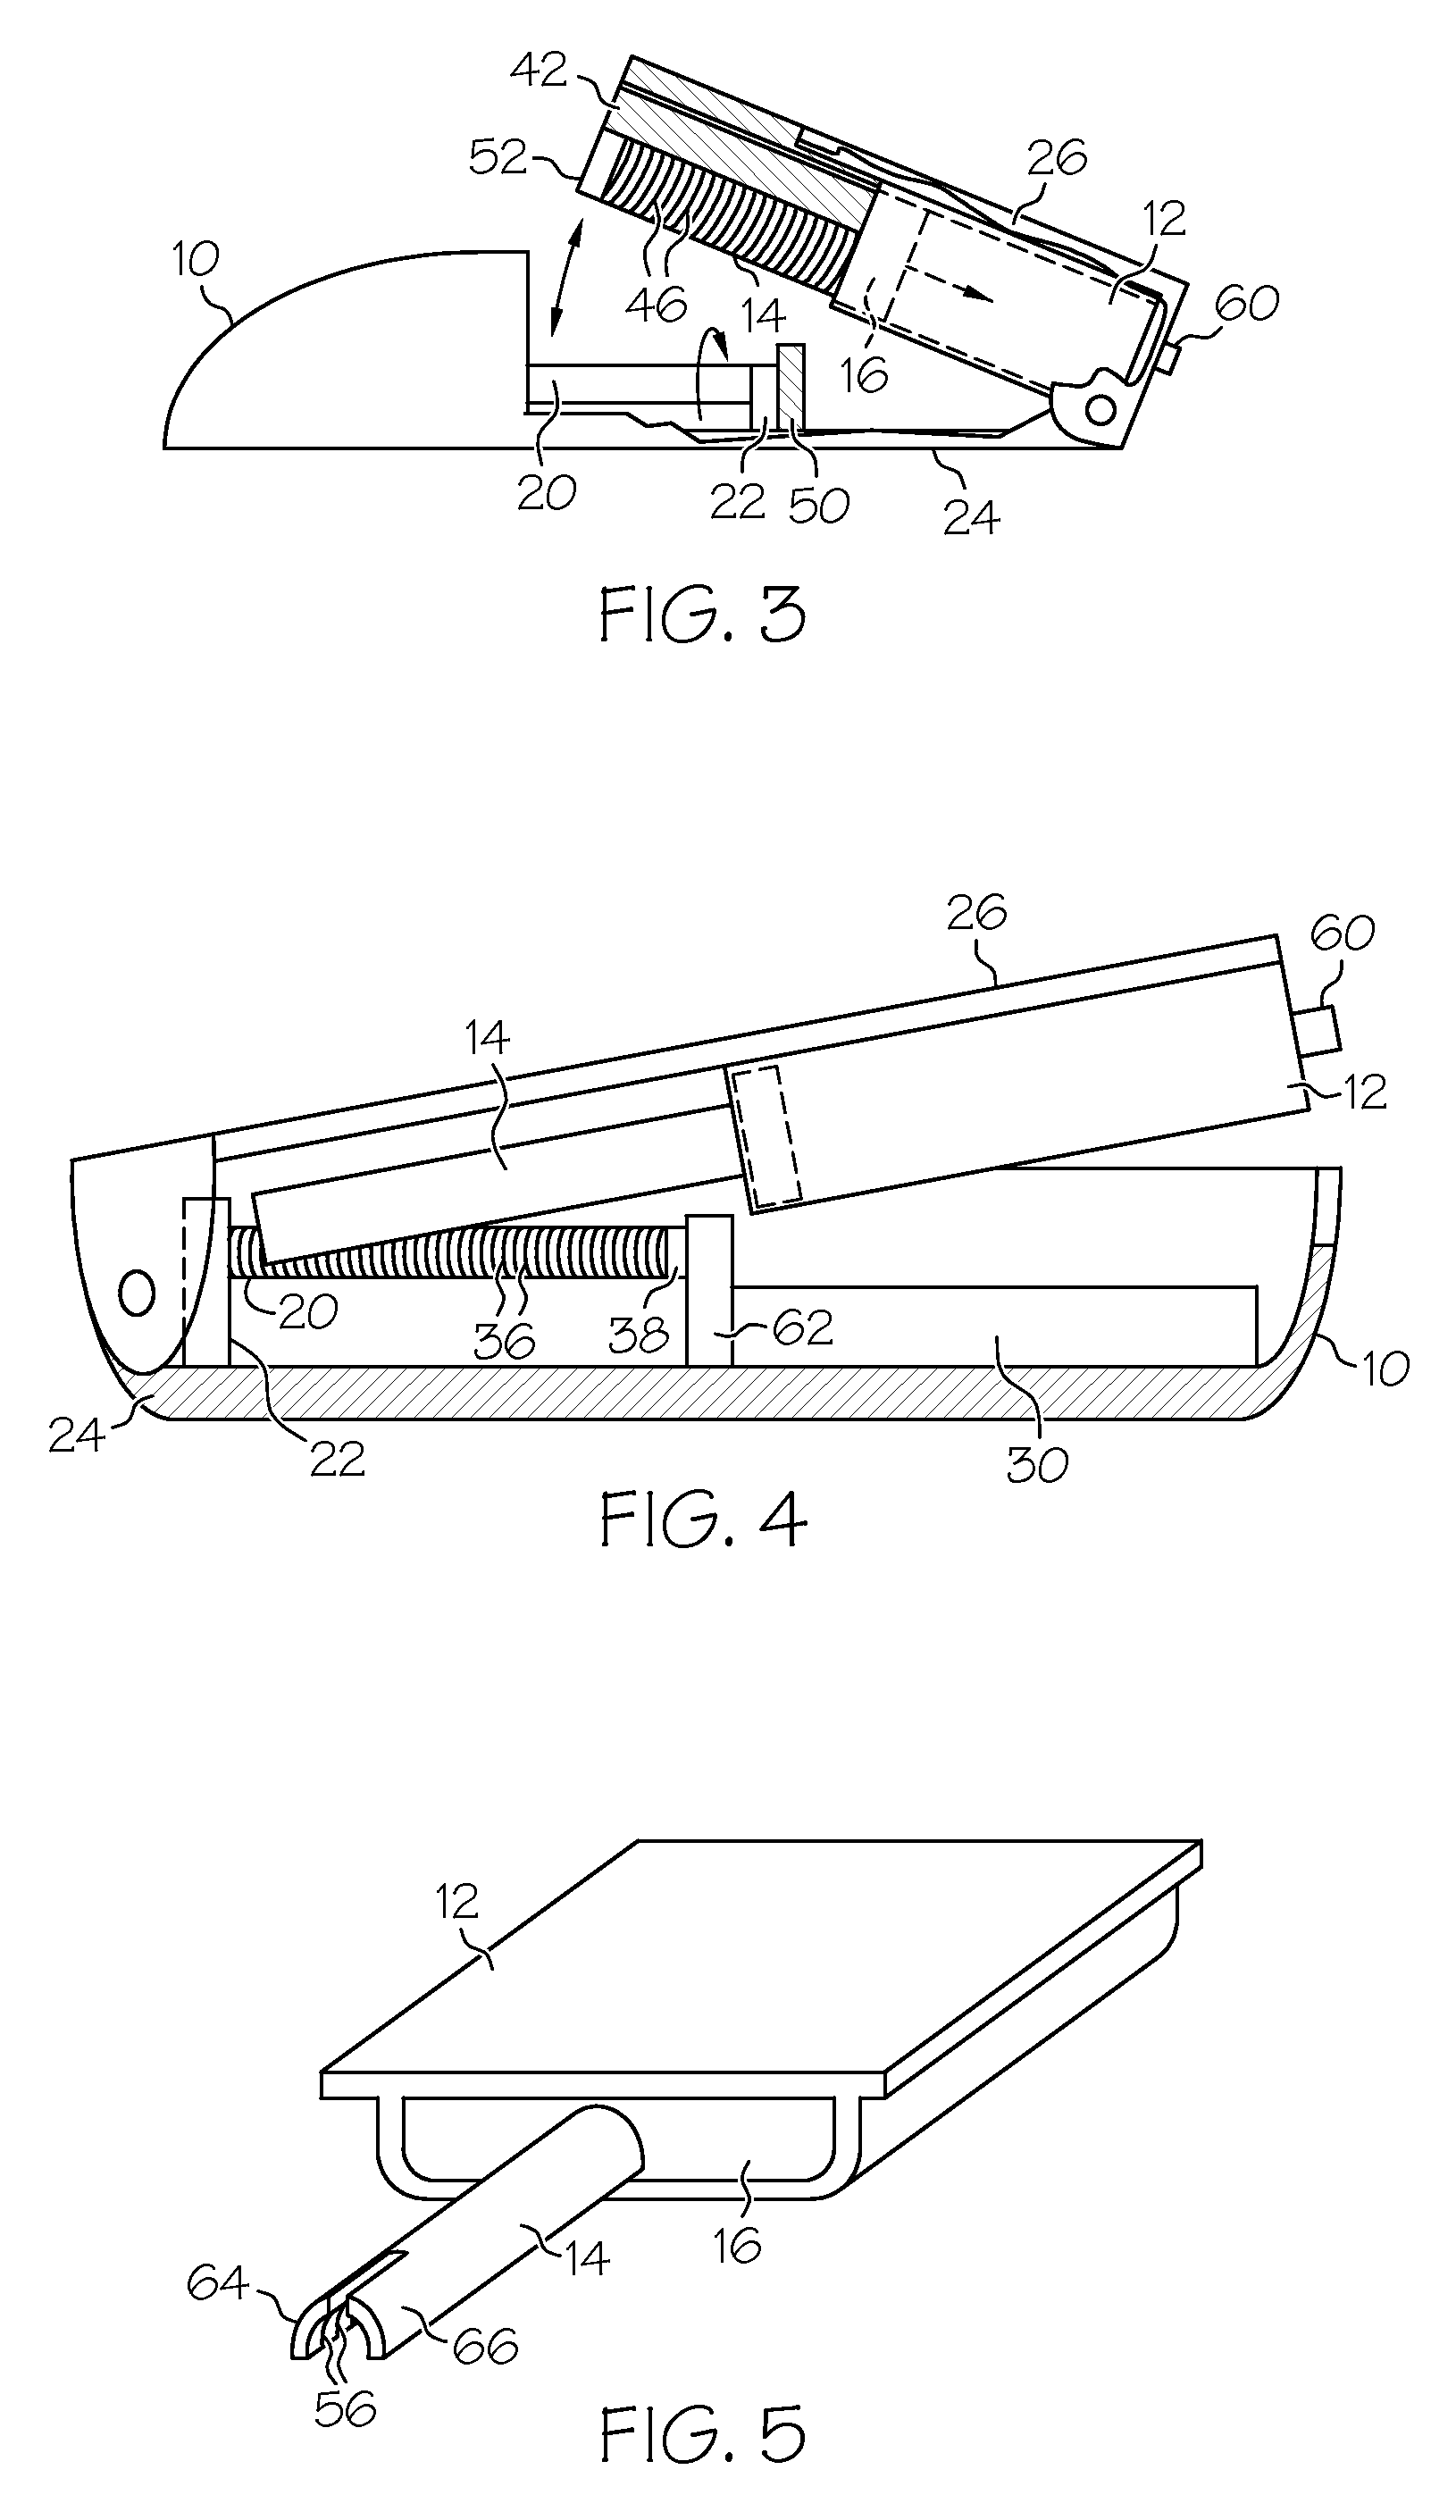 Drug reservoir loading and unloading mechanism for a drug delivery device using a unidirectional rotated shaft